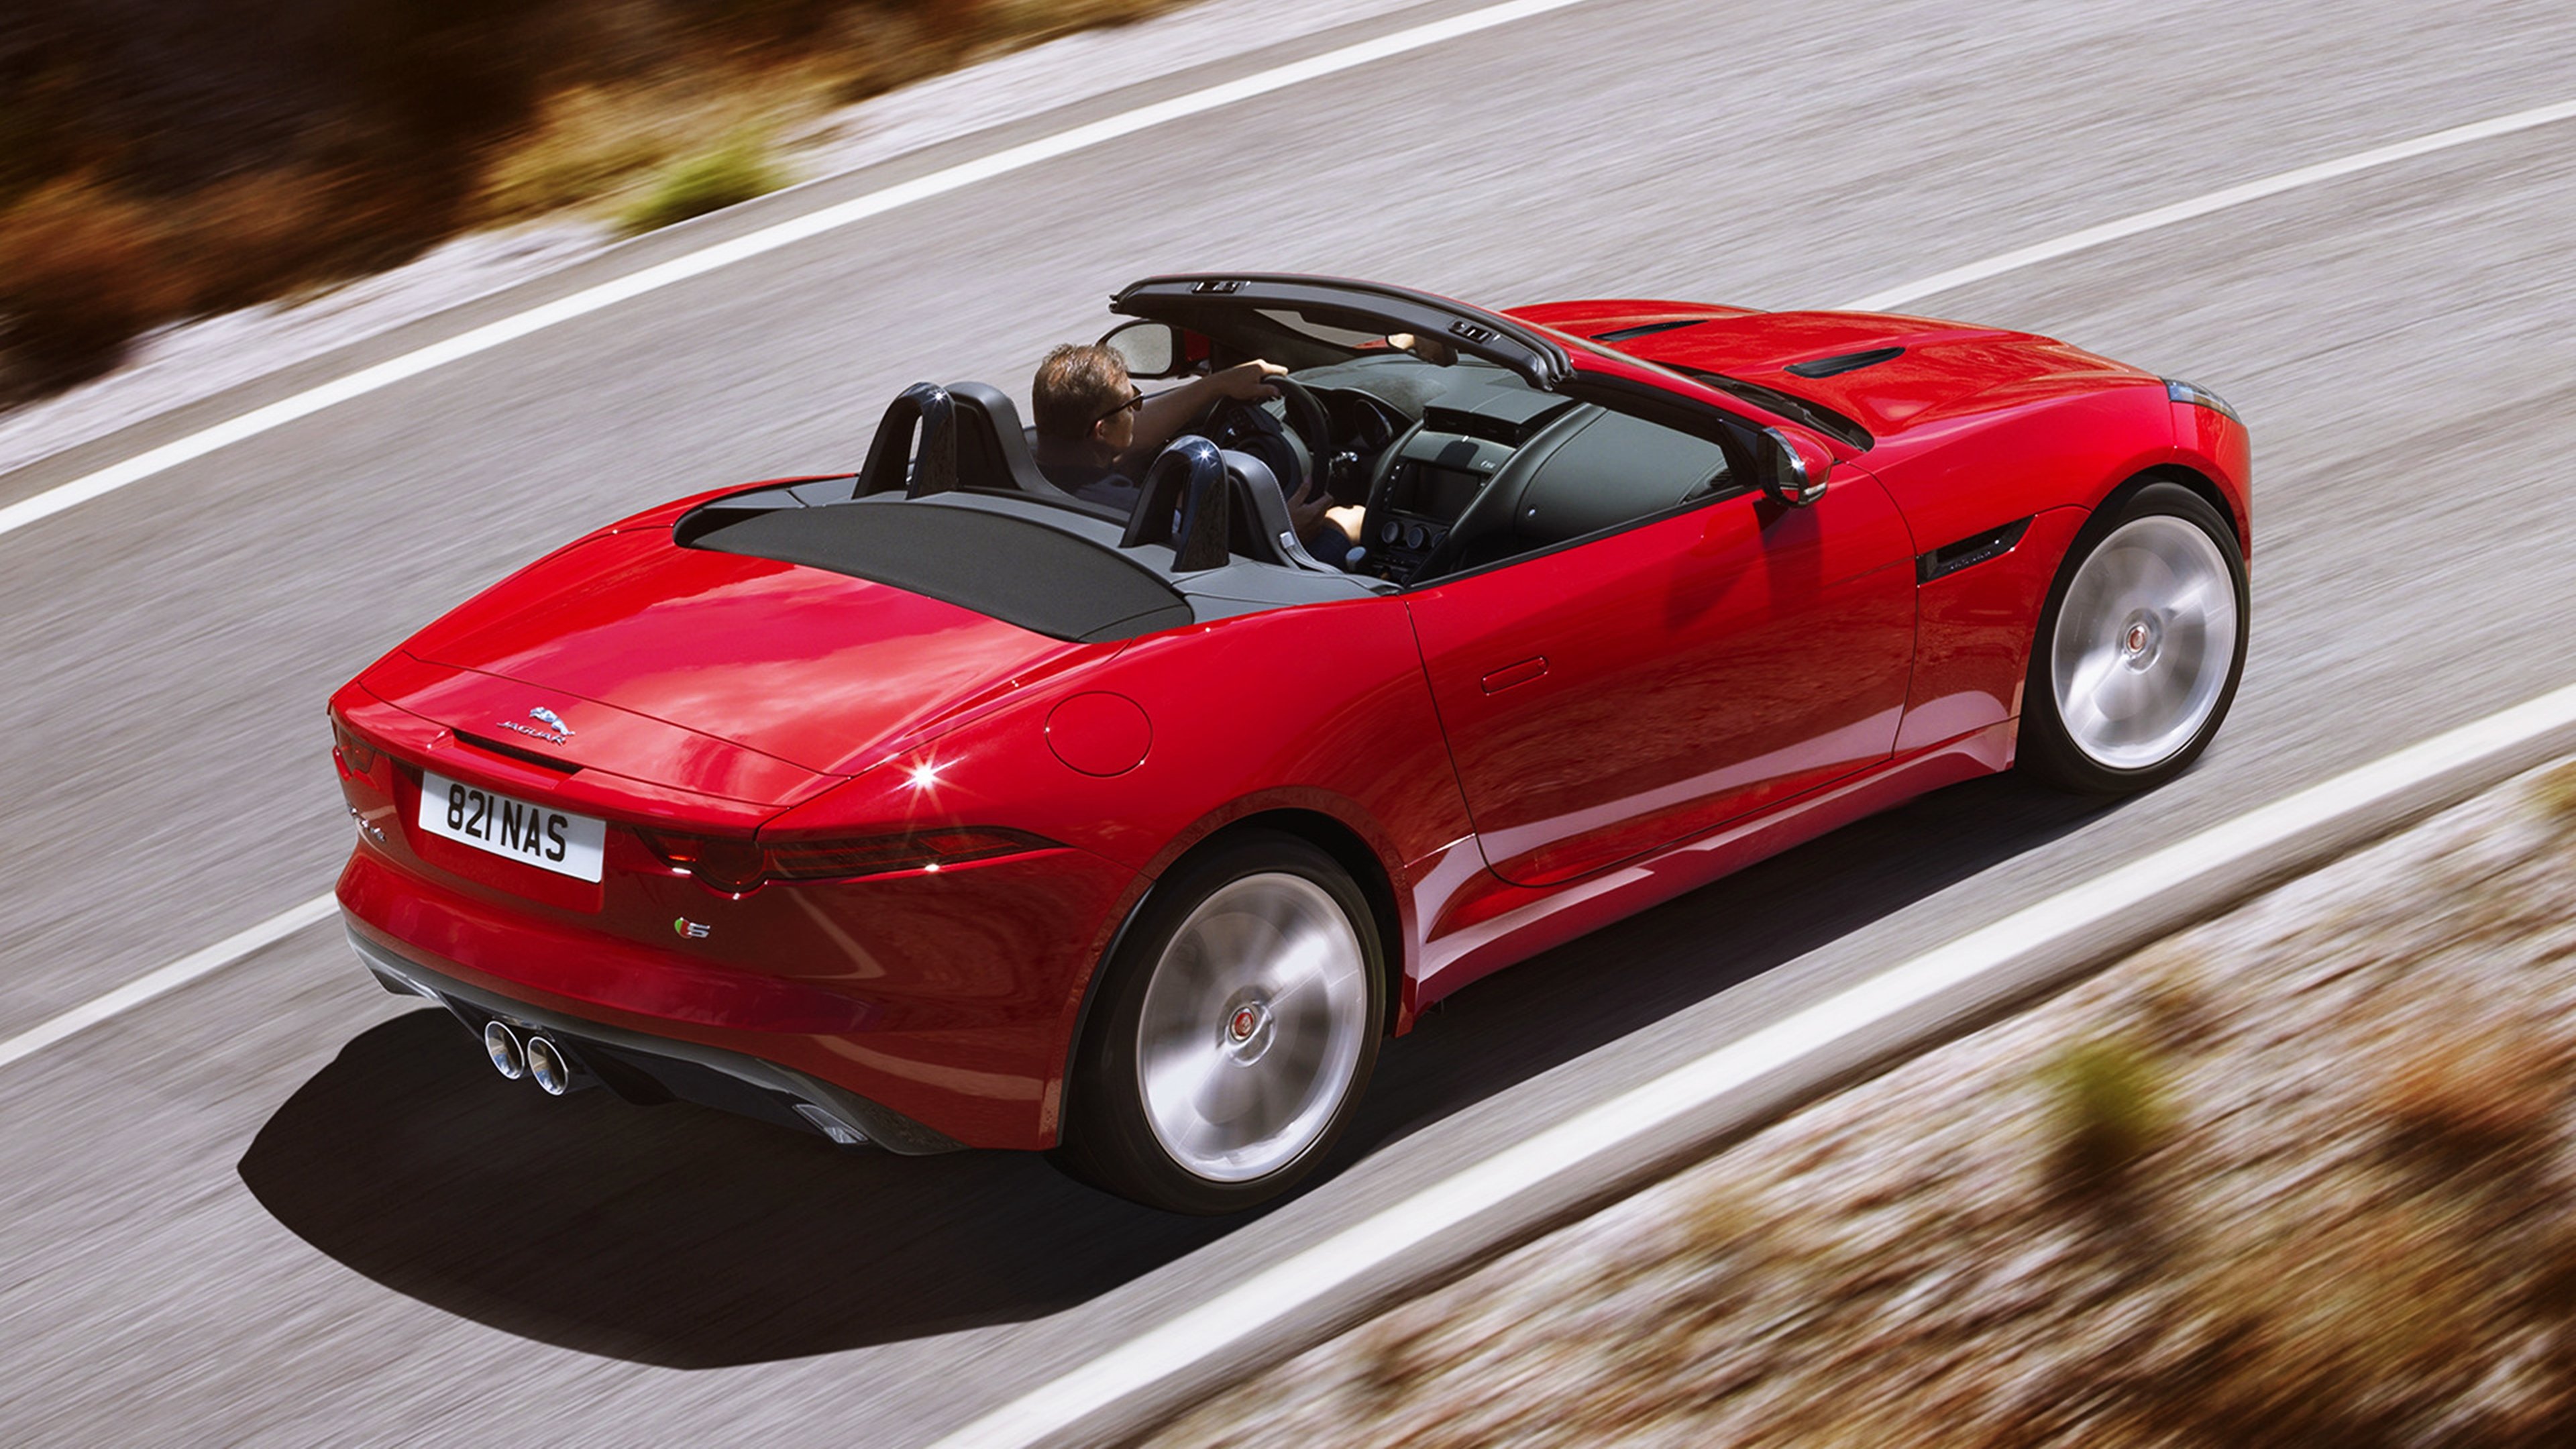 2015, Jaguar, F type, S, Red, Cars, Roof, Supercars, Road ...